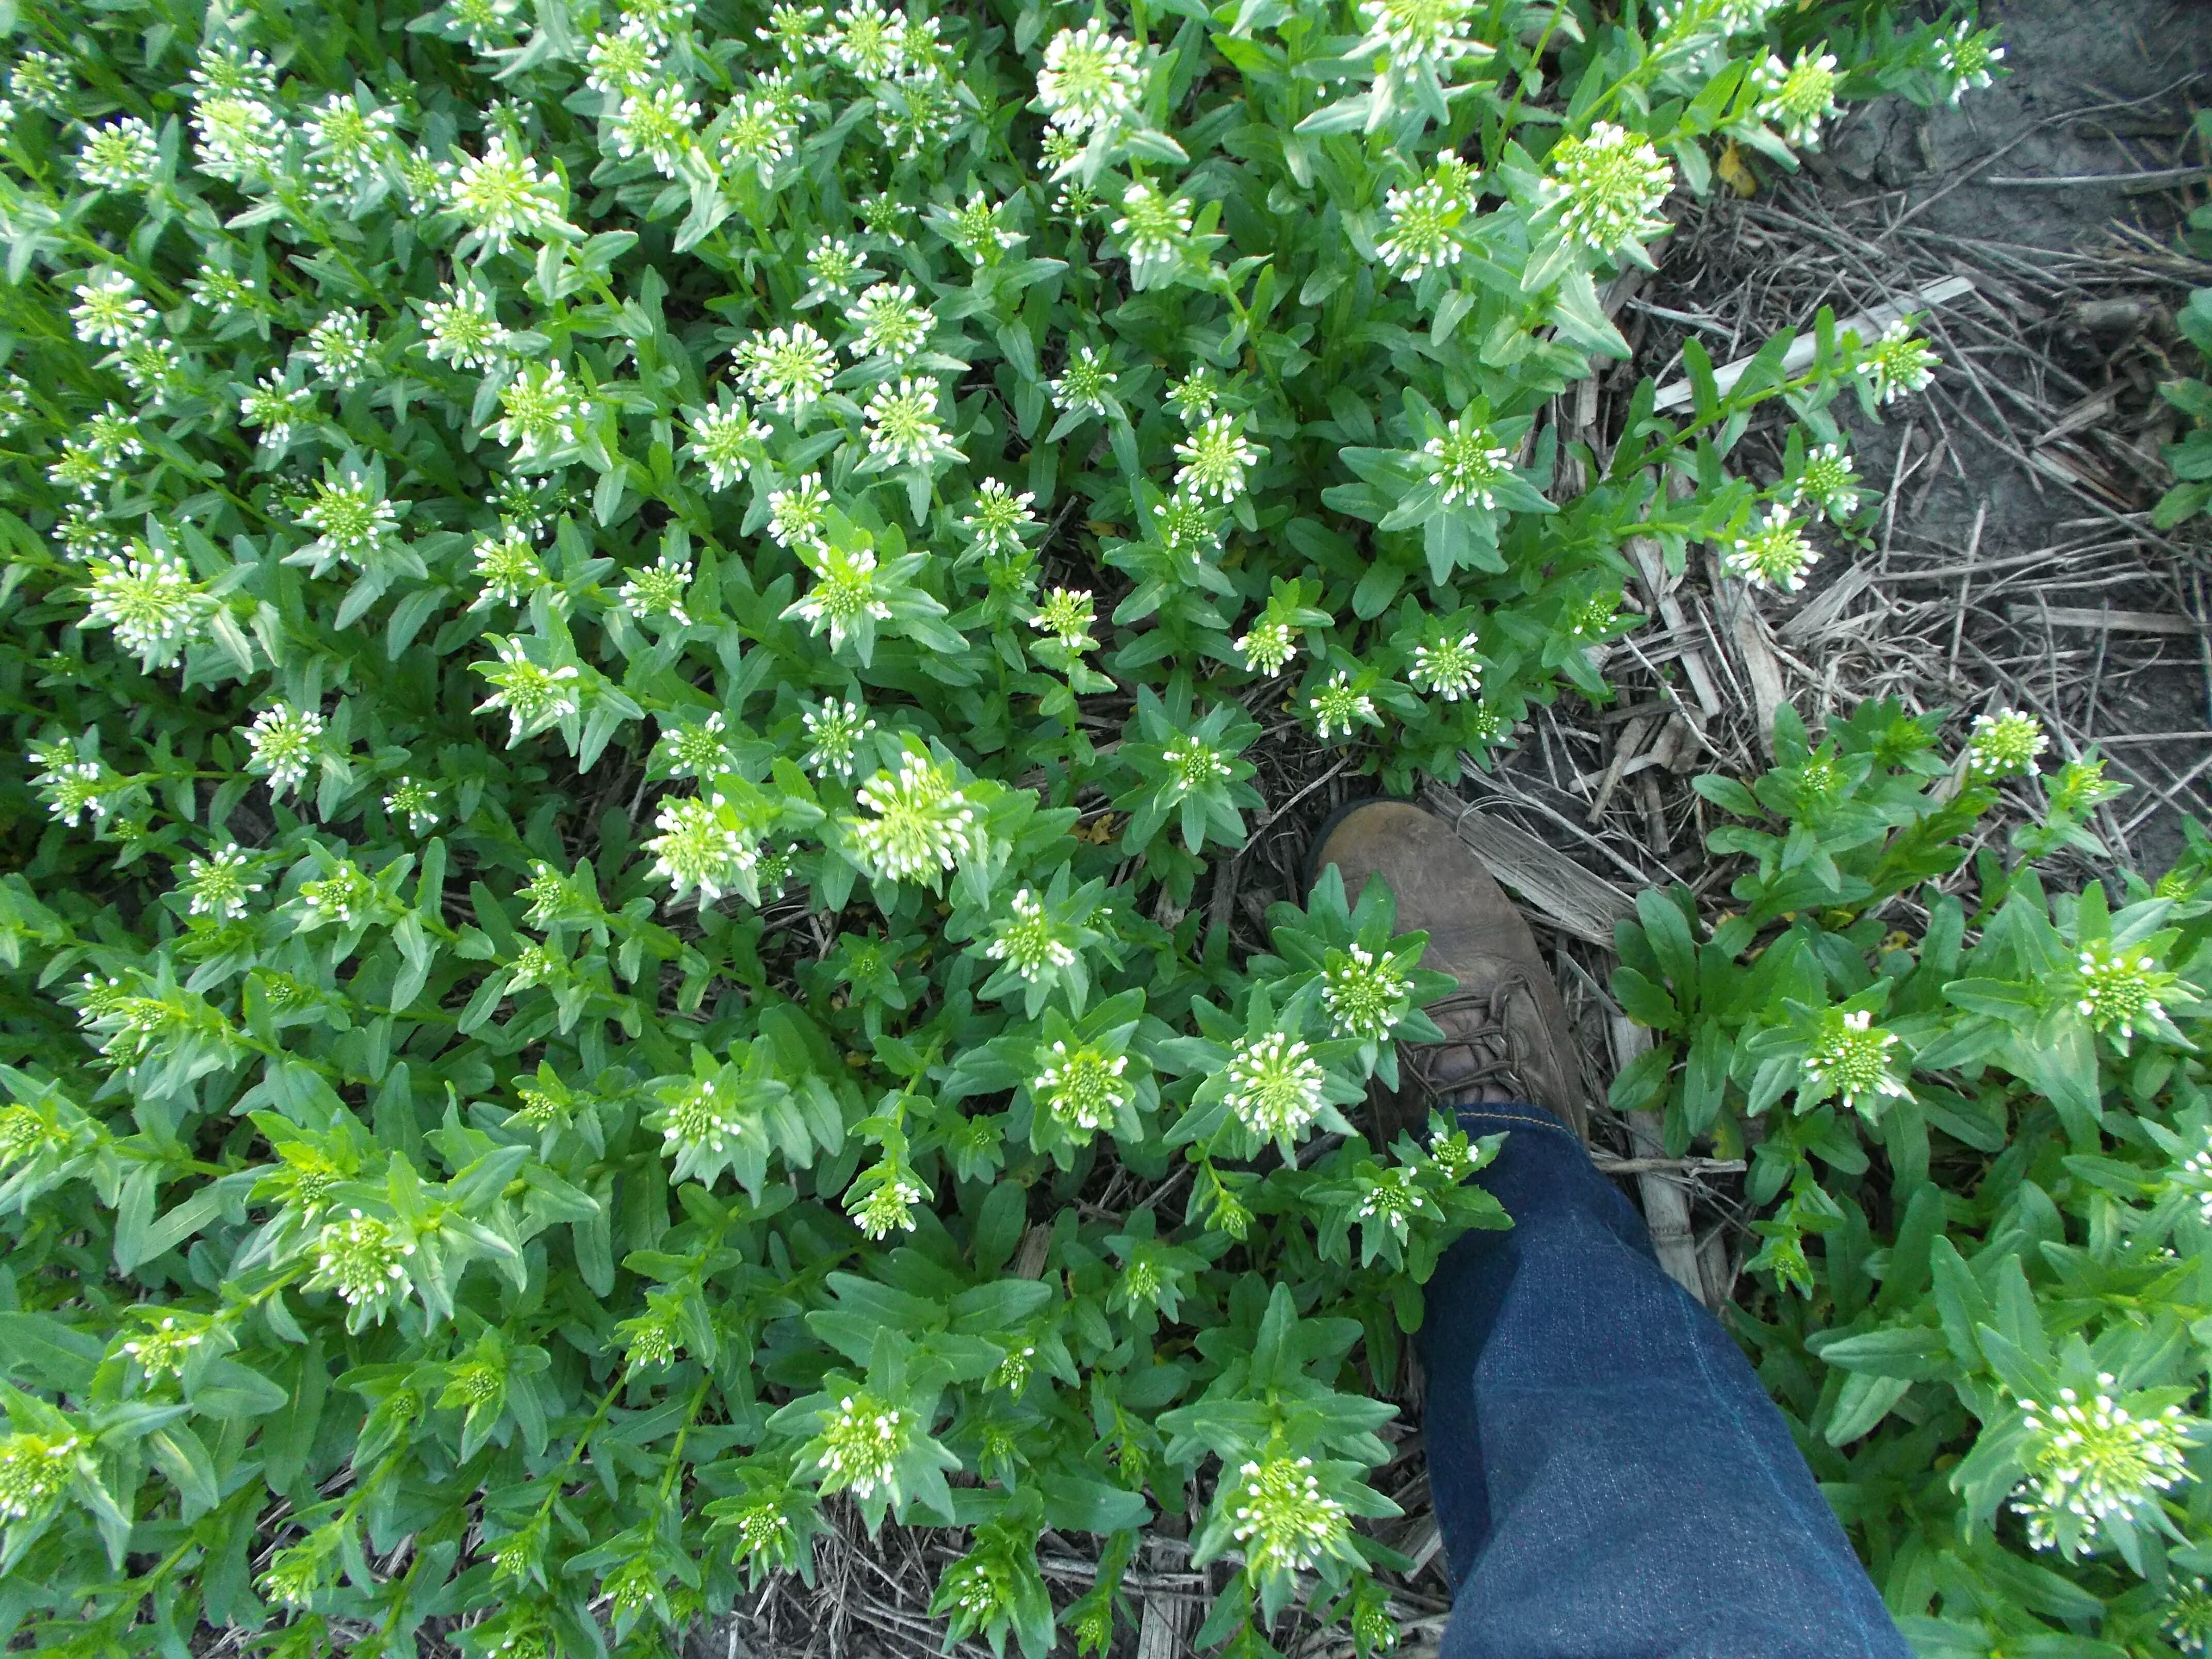 Field Pennycress at Boone on Apr. 24, 2017.